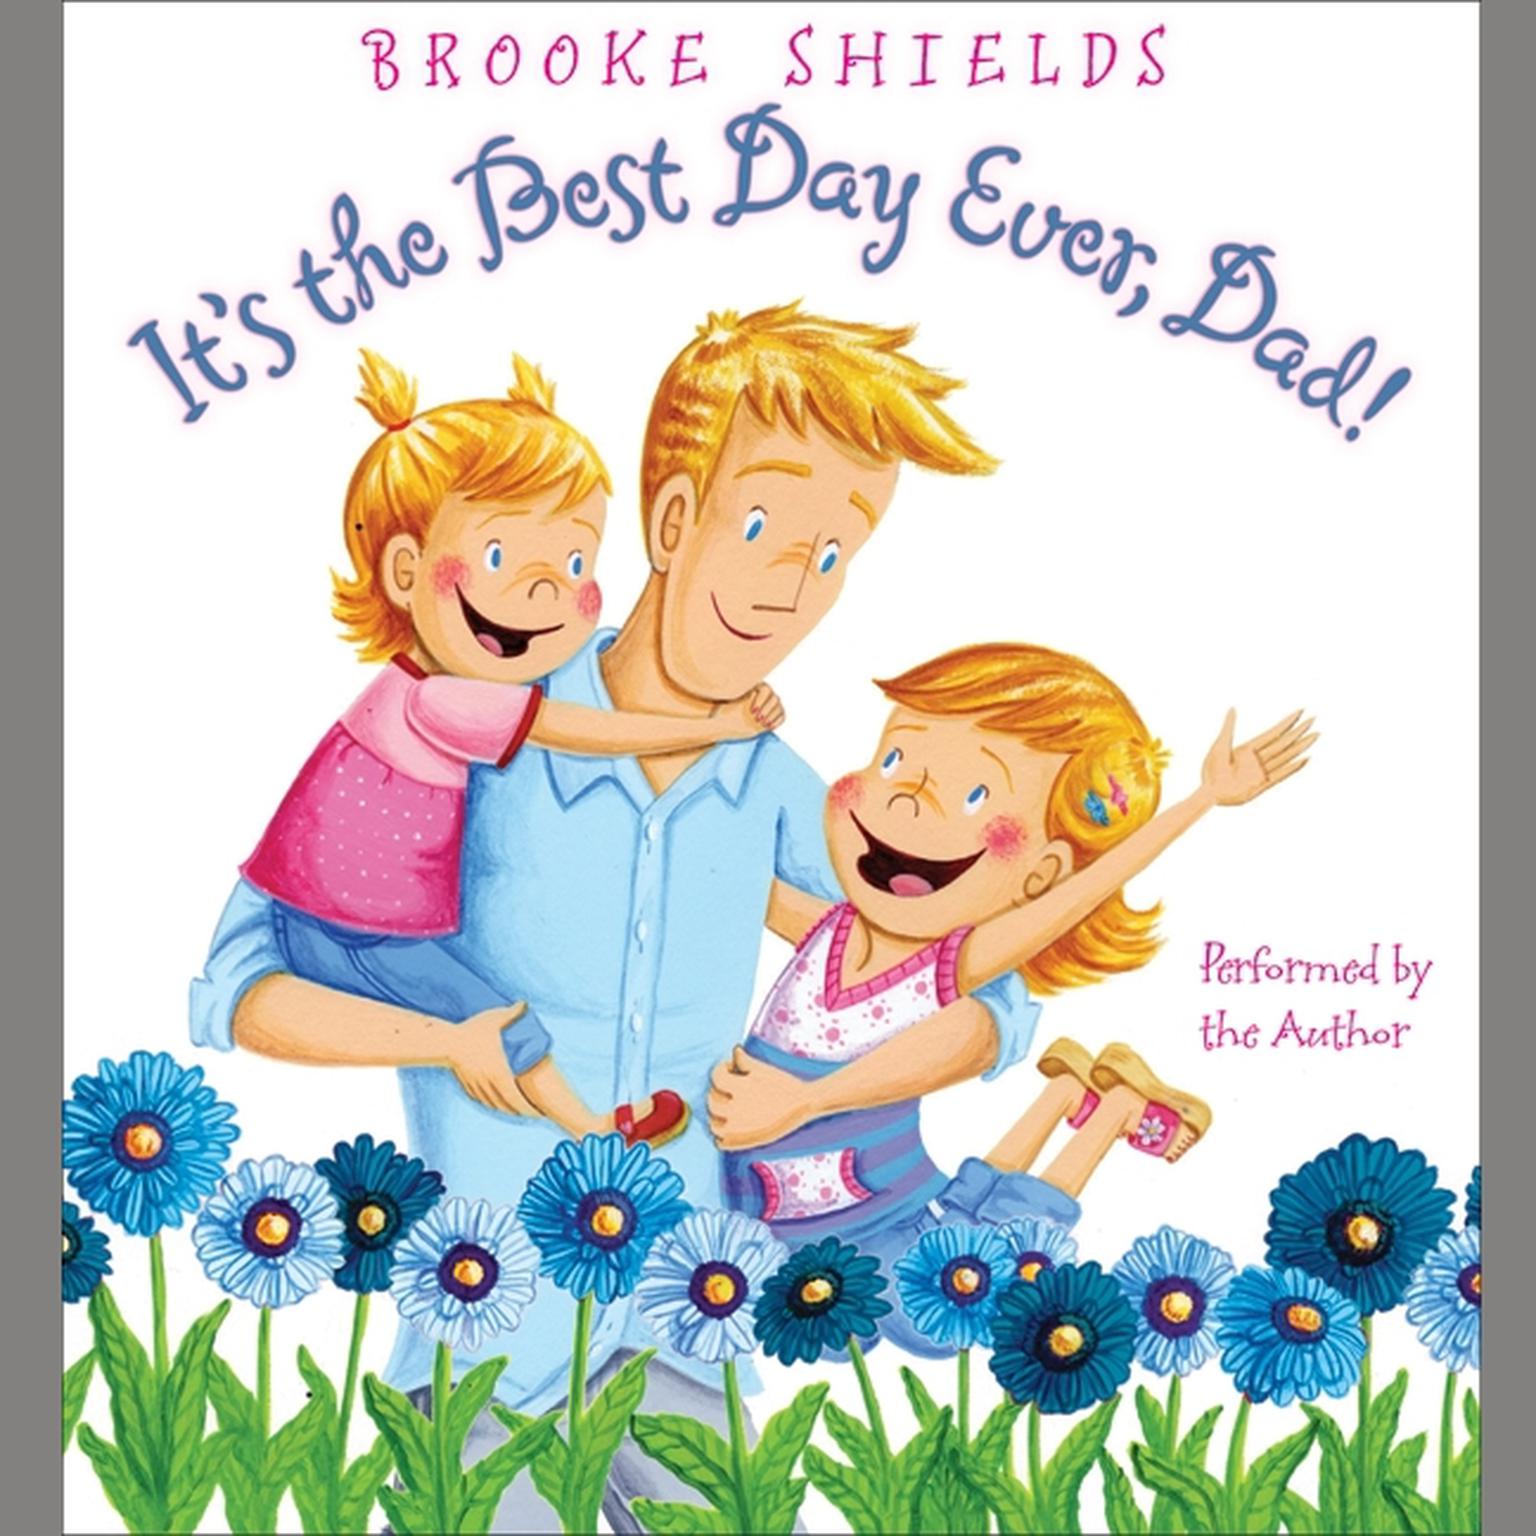 Its the Best Day Ever, Dad! Audiobook, by Brooke Shields